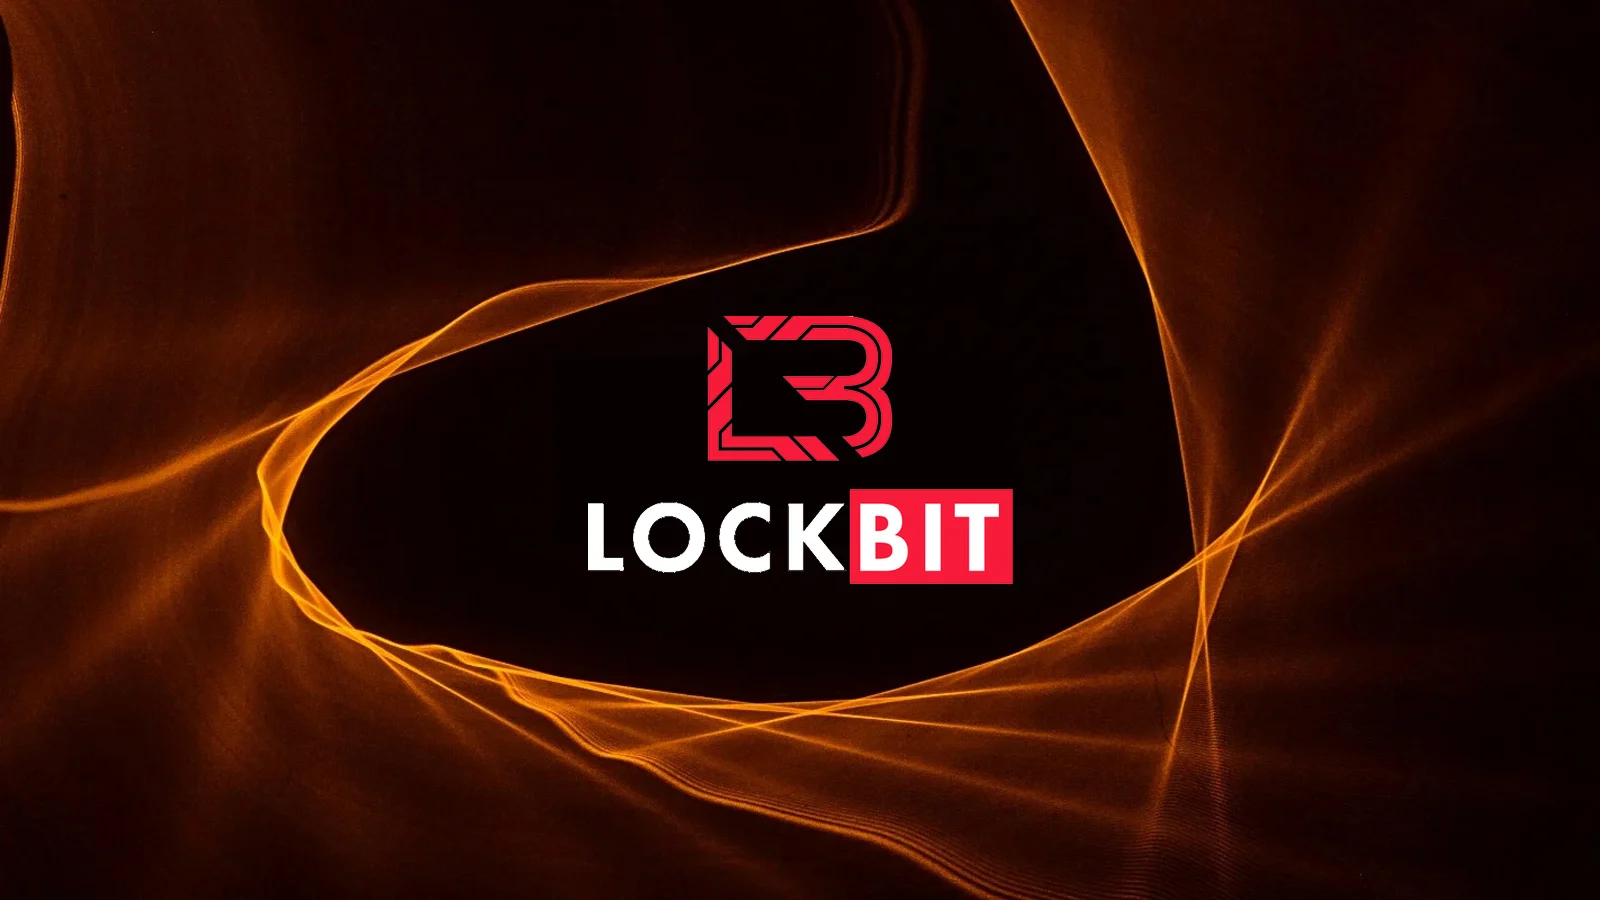 LockBit Ransomware Gang Hit by Global Police, Continues Operations